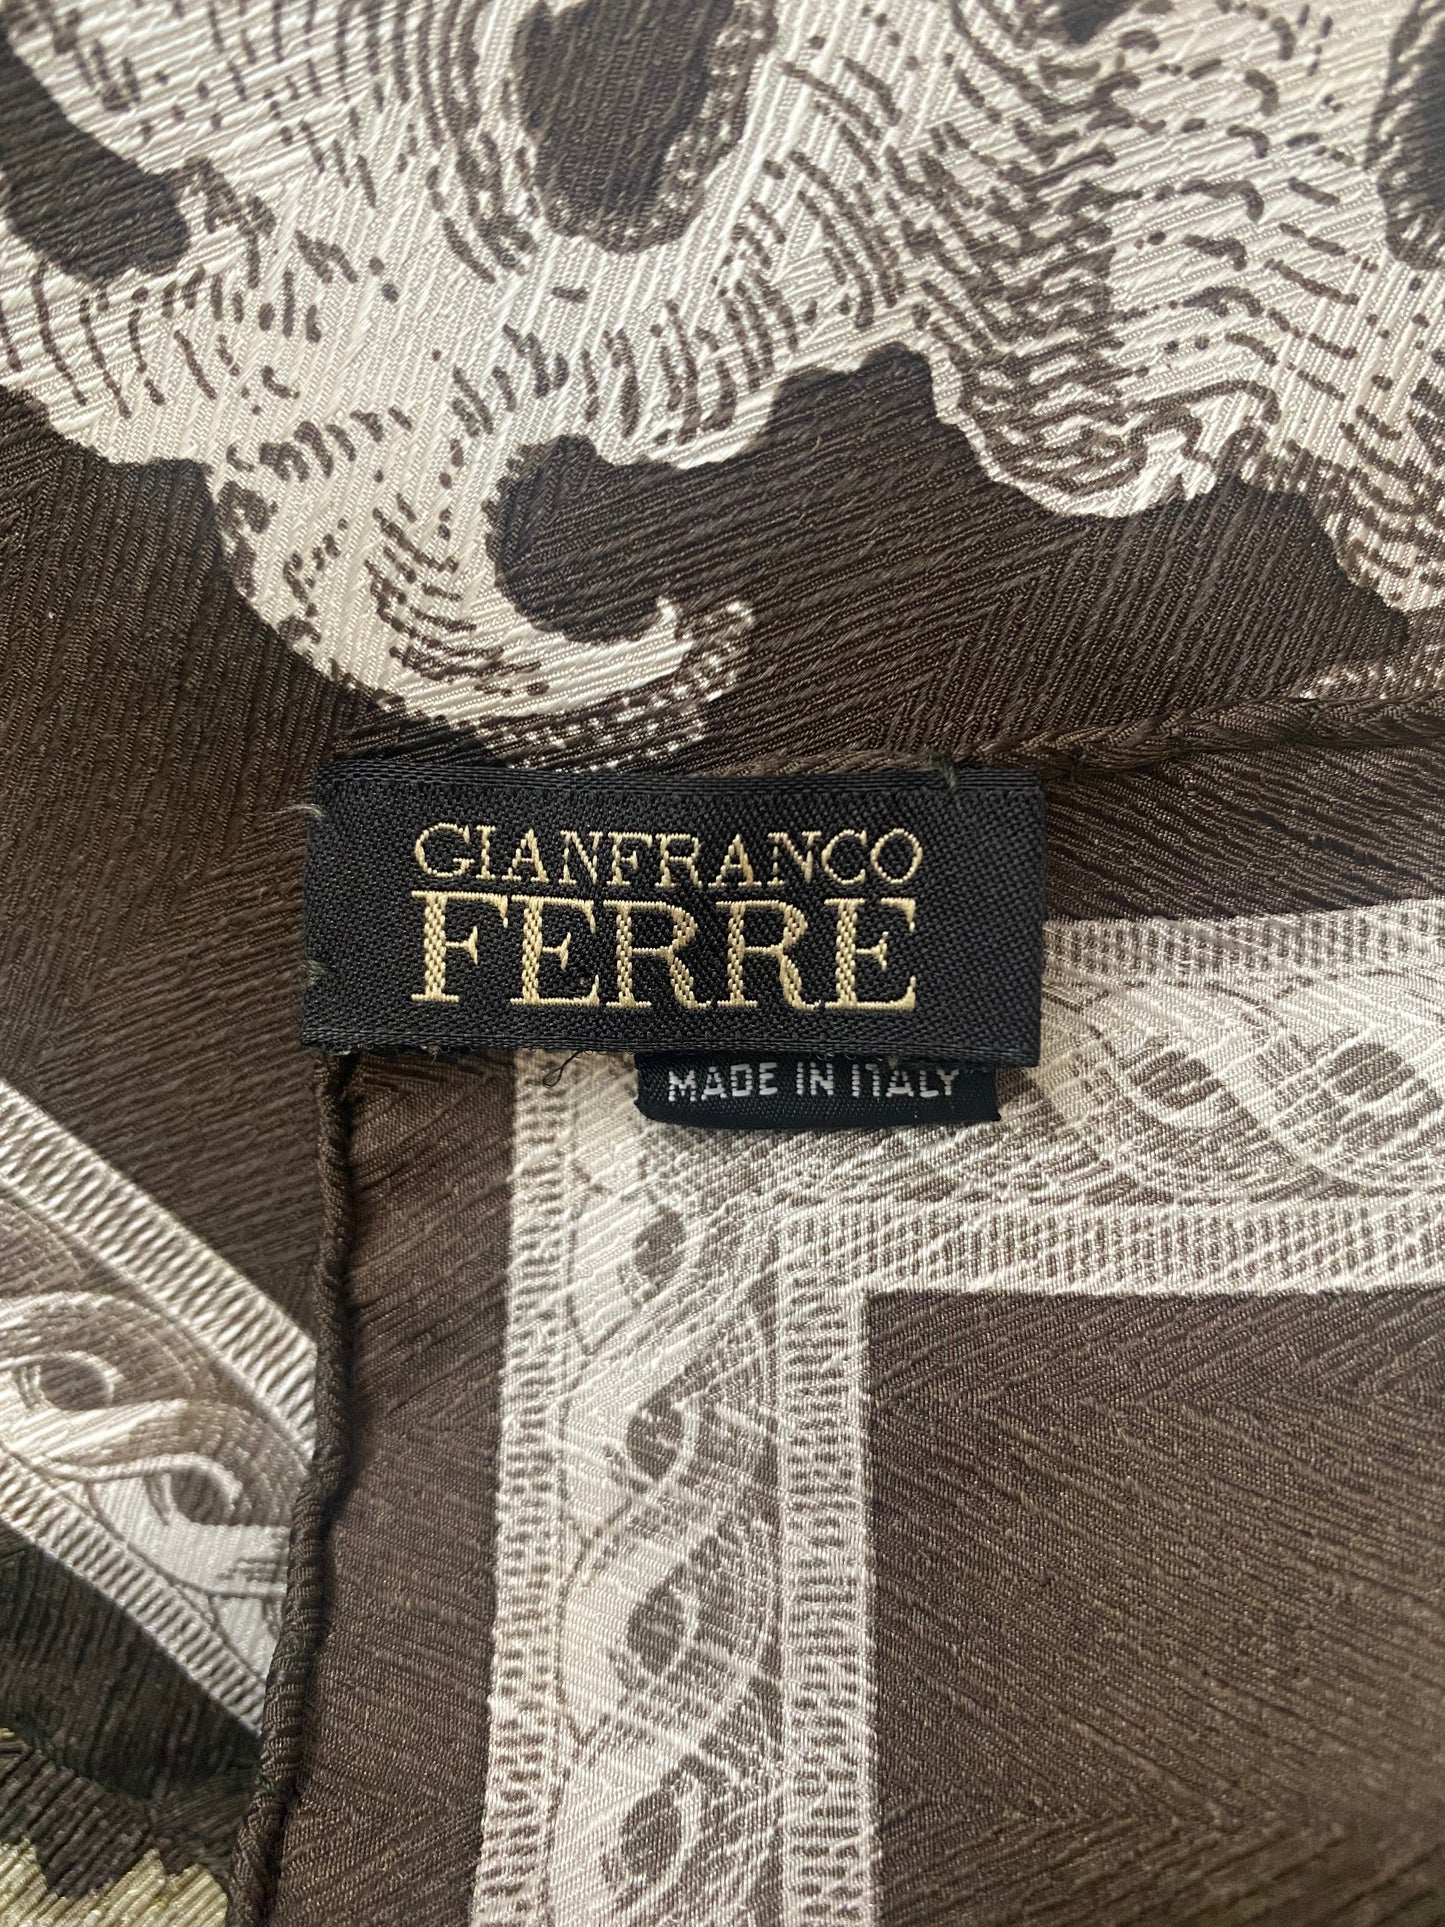 Vintage Gianfranco Ferre “Flacons Frame” Pattern Silk Scarf Made in Italy